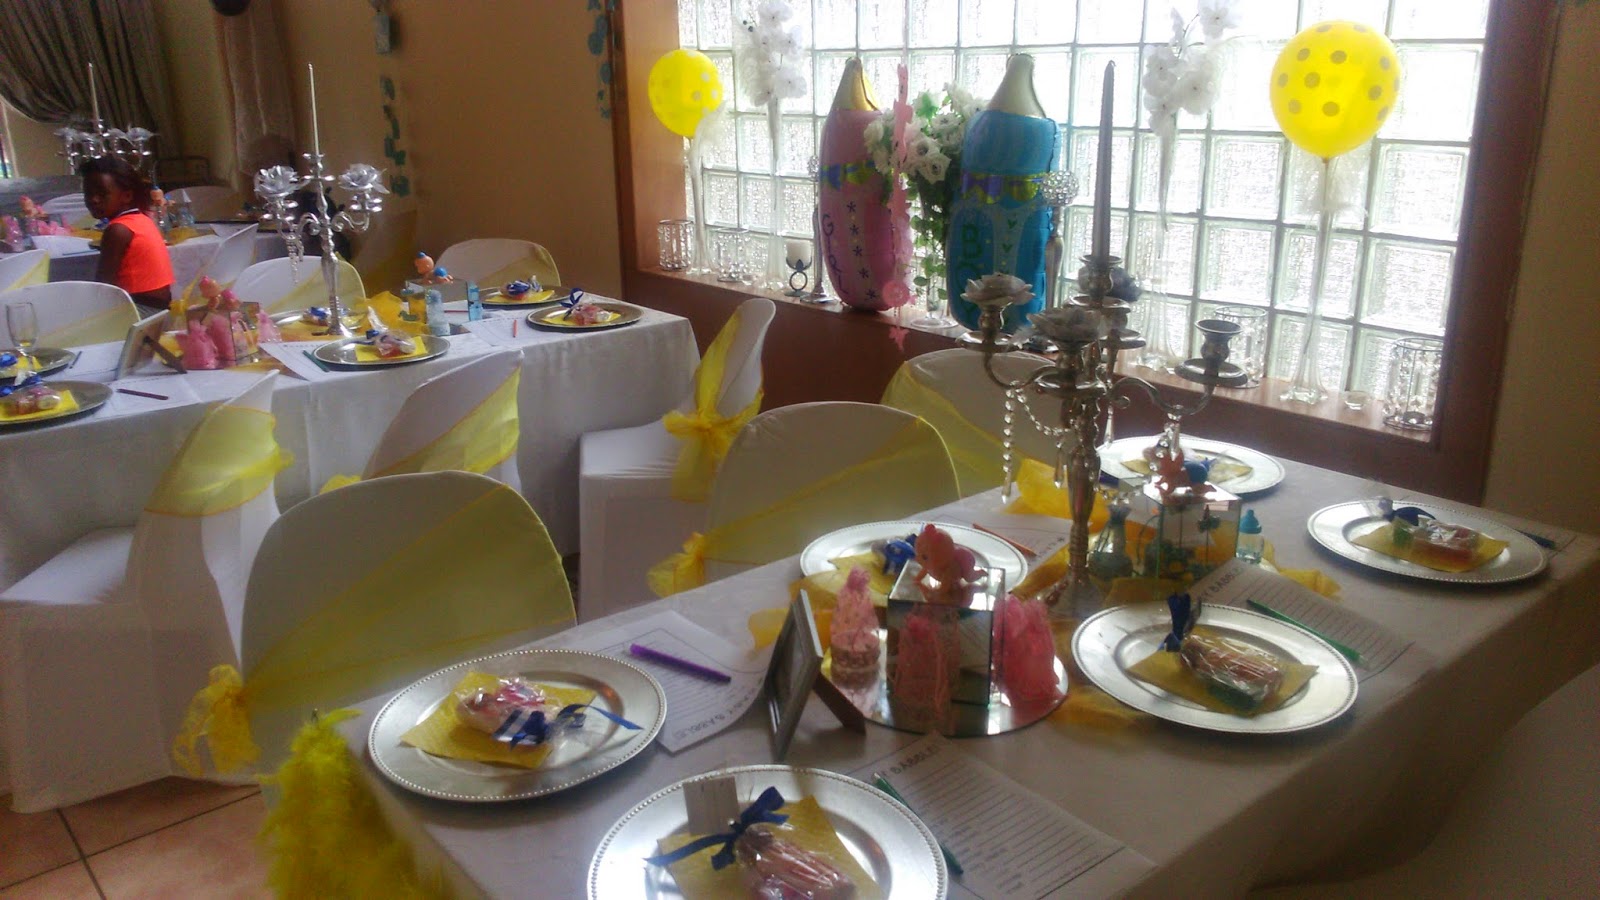 Boutique Venue with Full Setups and Halaal Catering: #Baby Shower VENUE with Halaal Catering ...